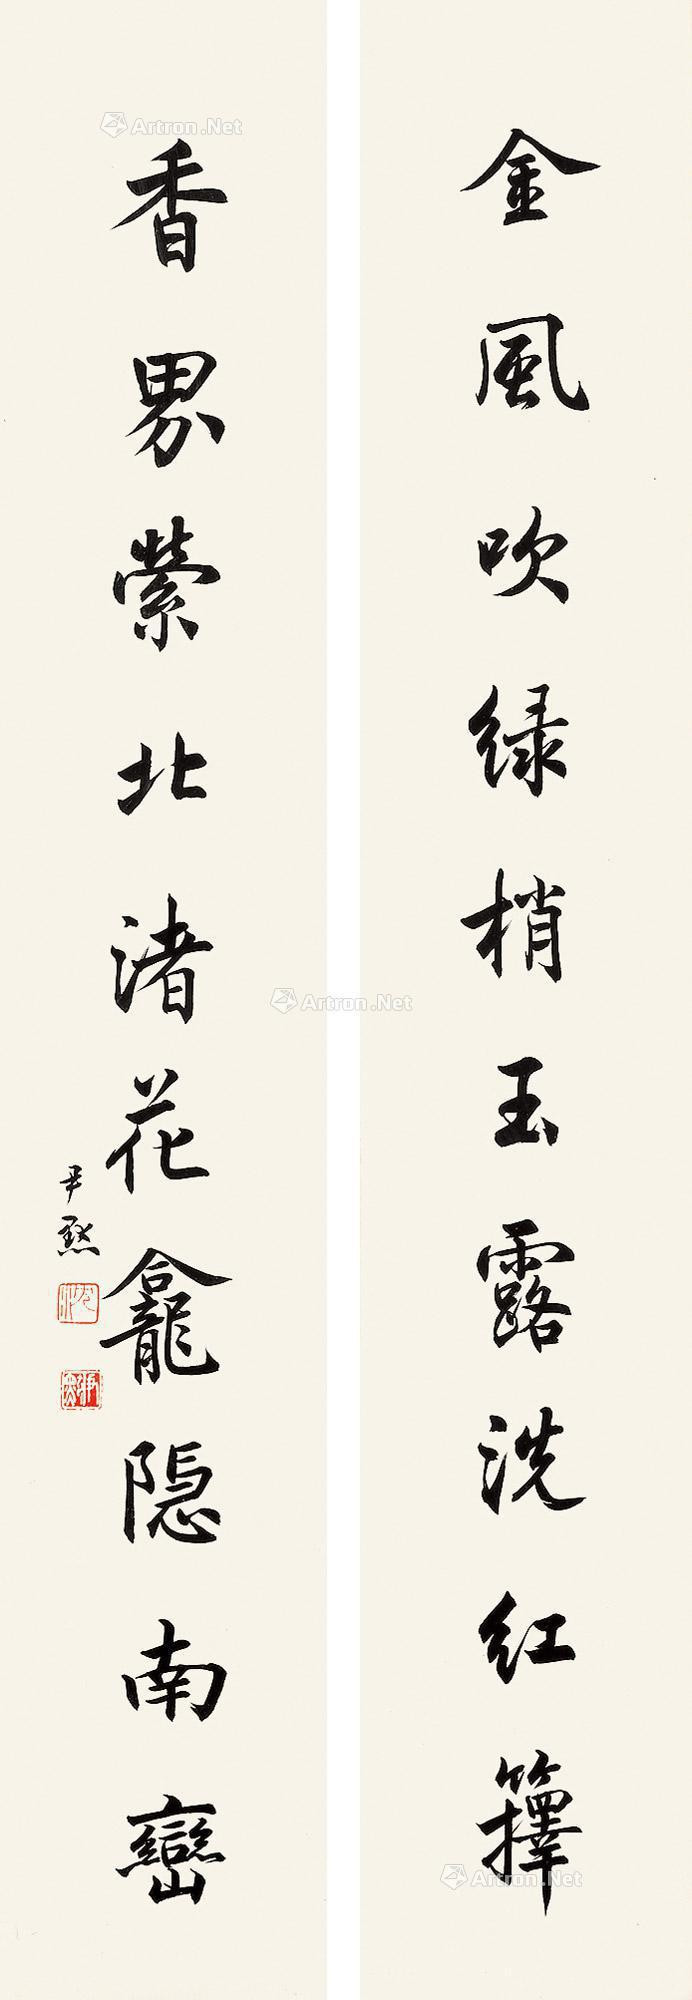 Calligraphy by Shen Yimo